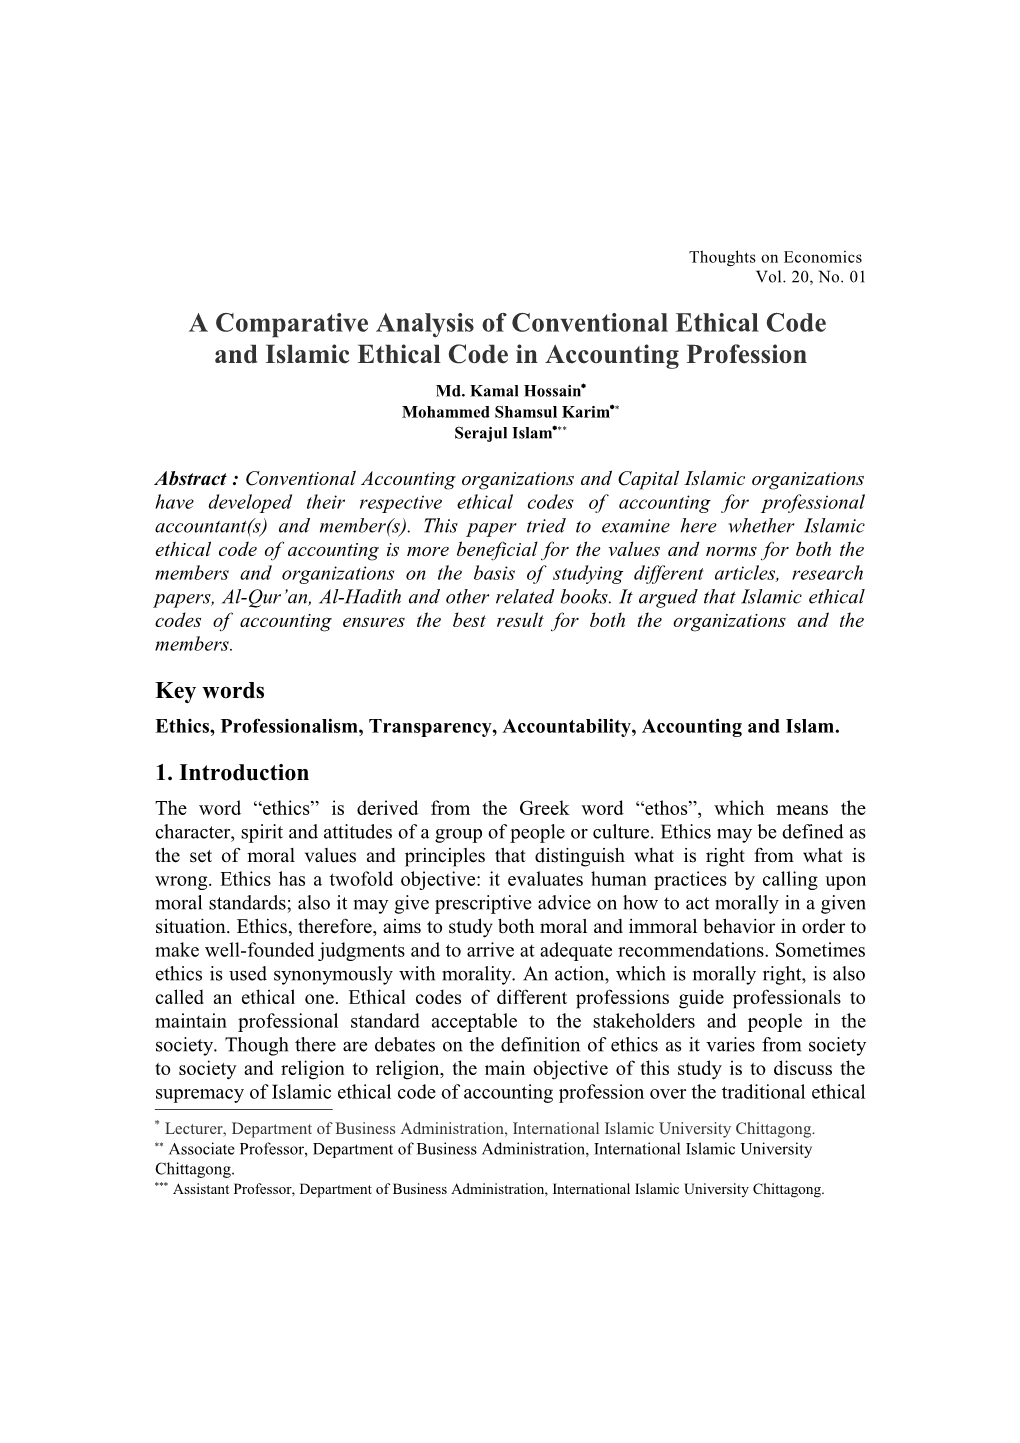 A Comparative Analysis of Conventional Ethical Code And